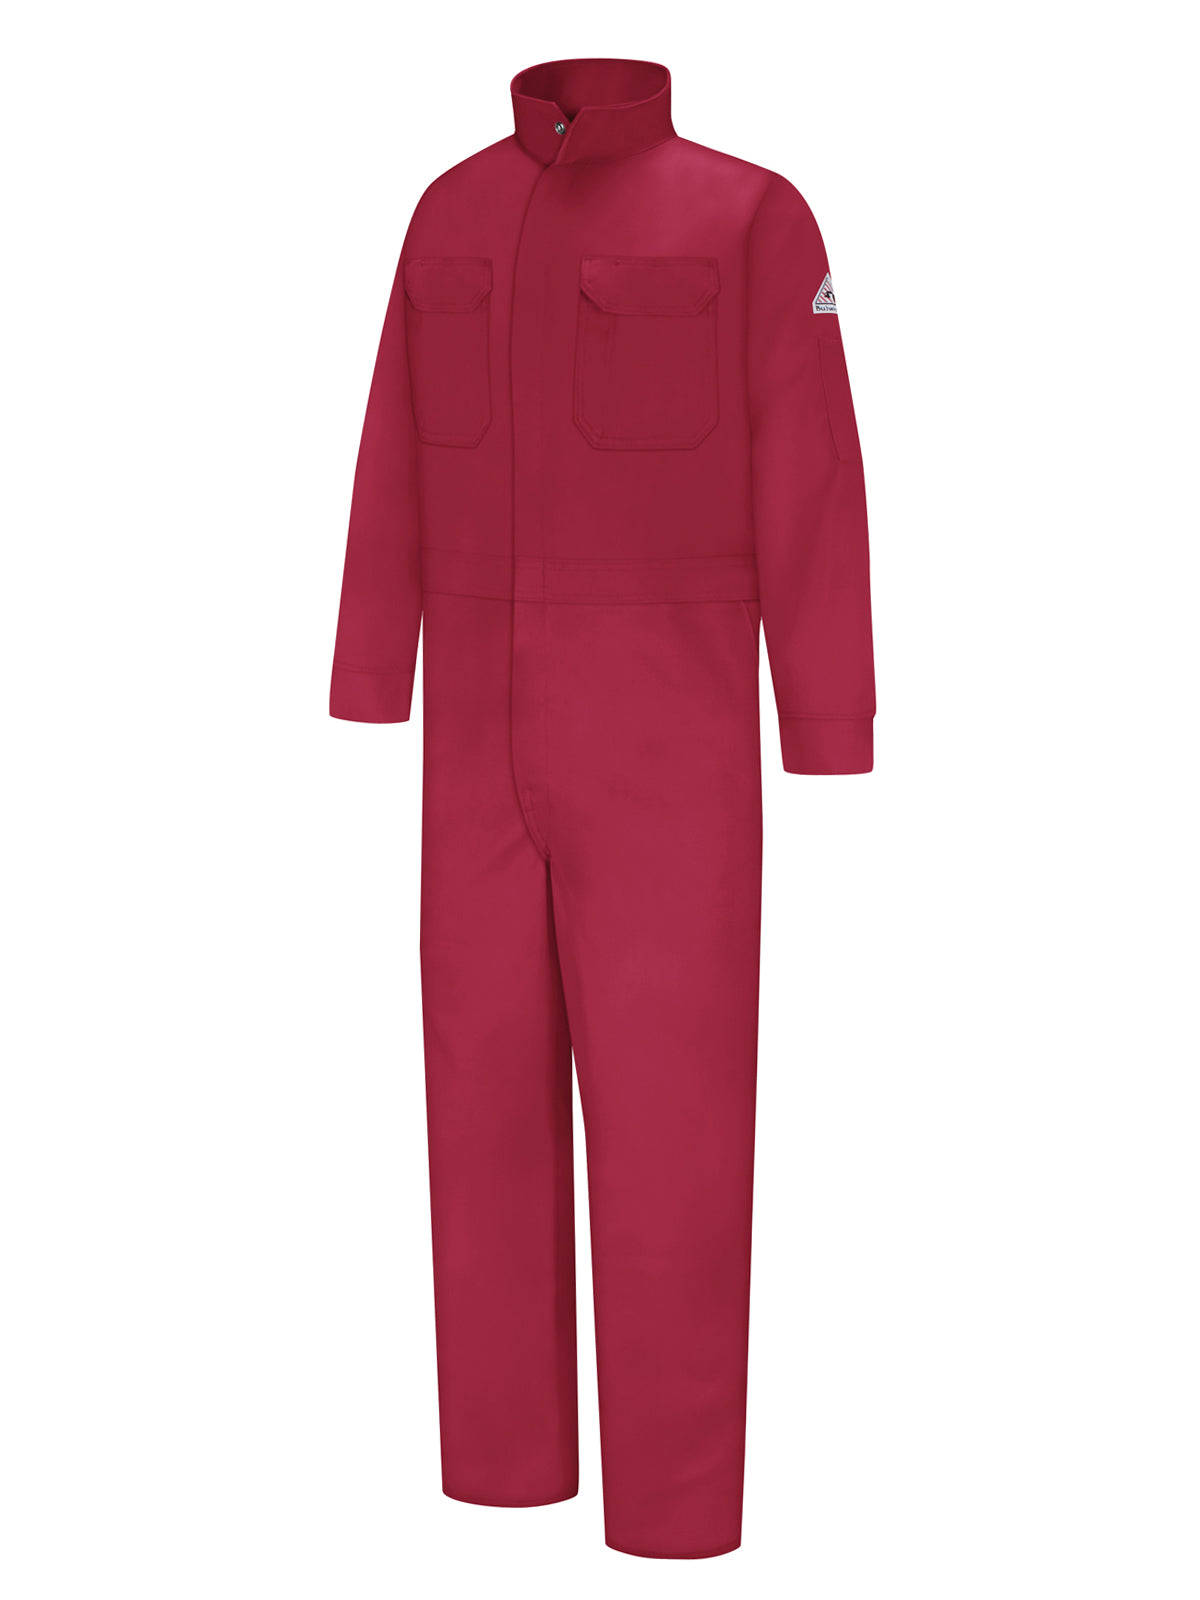 Men's Midweight Excel Flame-Resistant Premium Coverall - CEB2 - Red